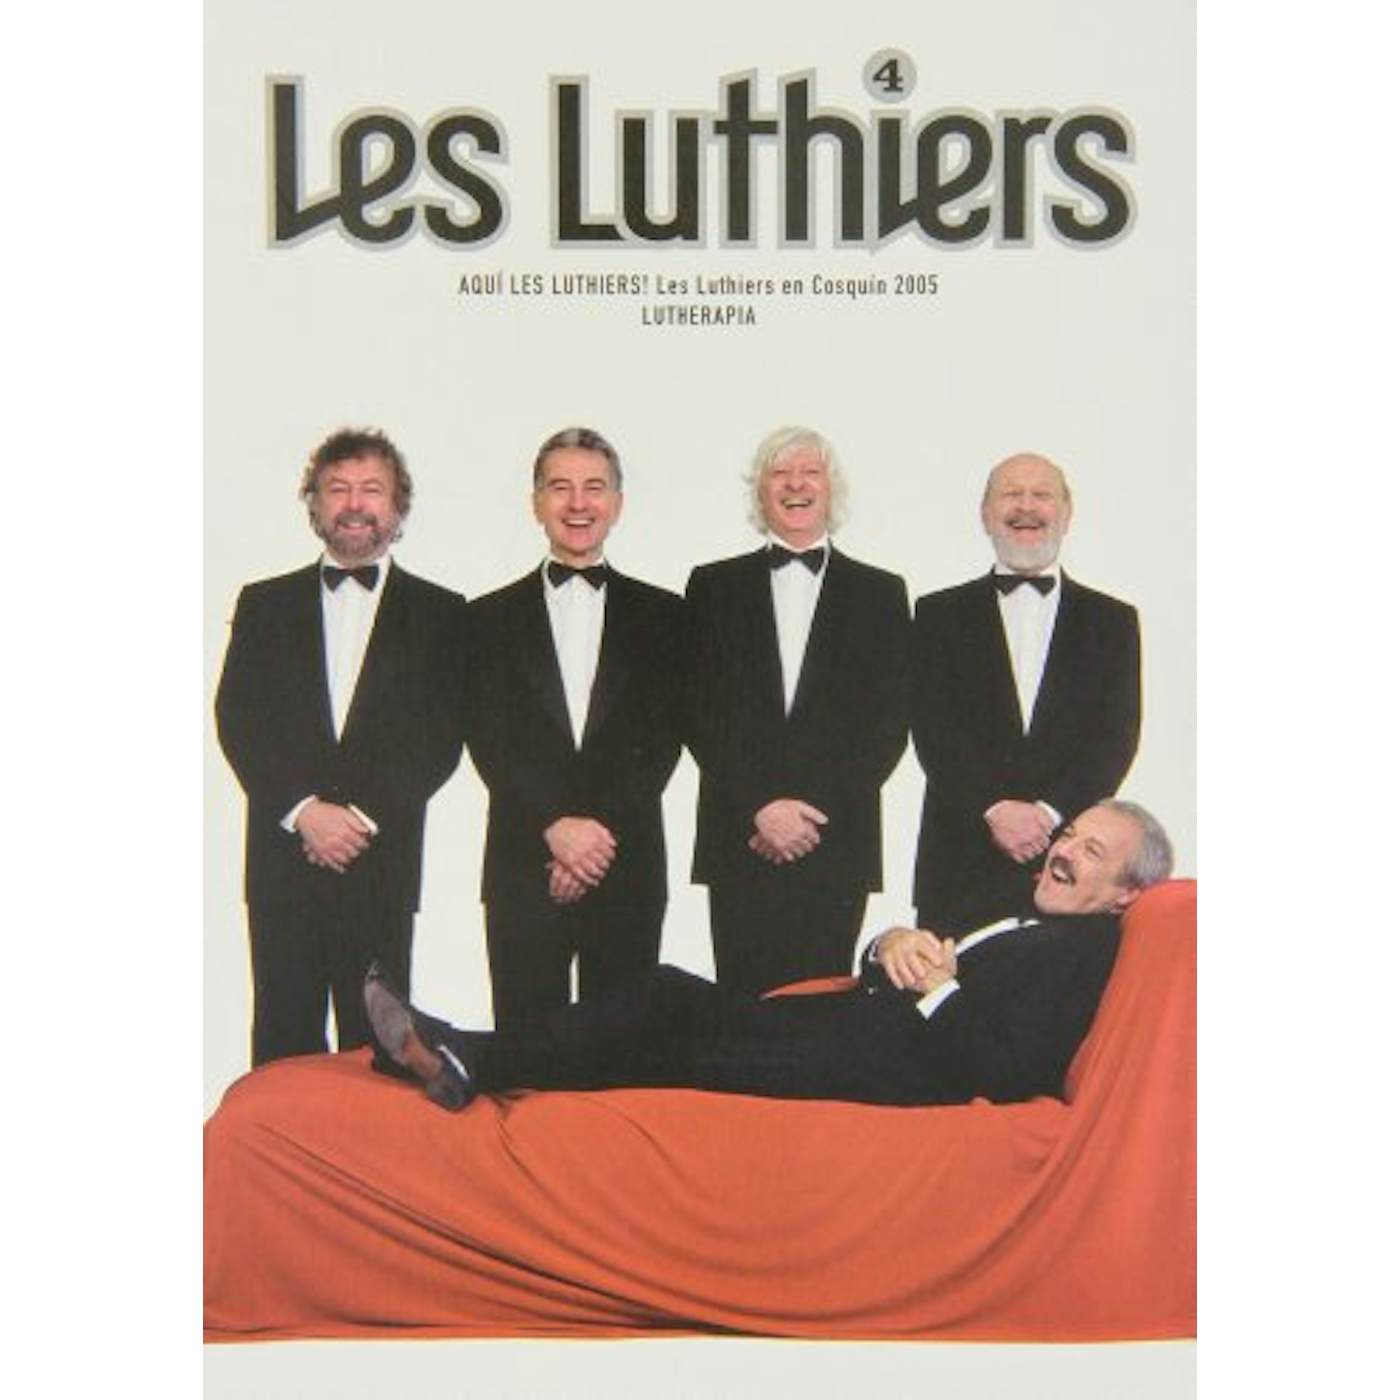 Les Luthiers PACK ANIVERSARIO 4 DVD